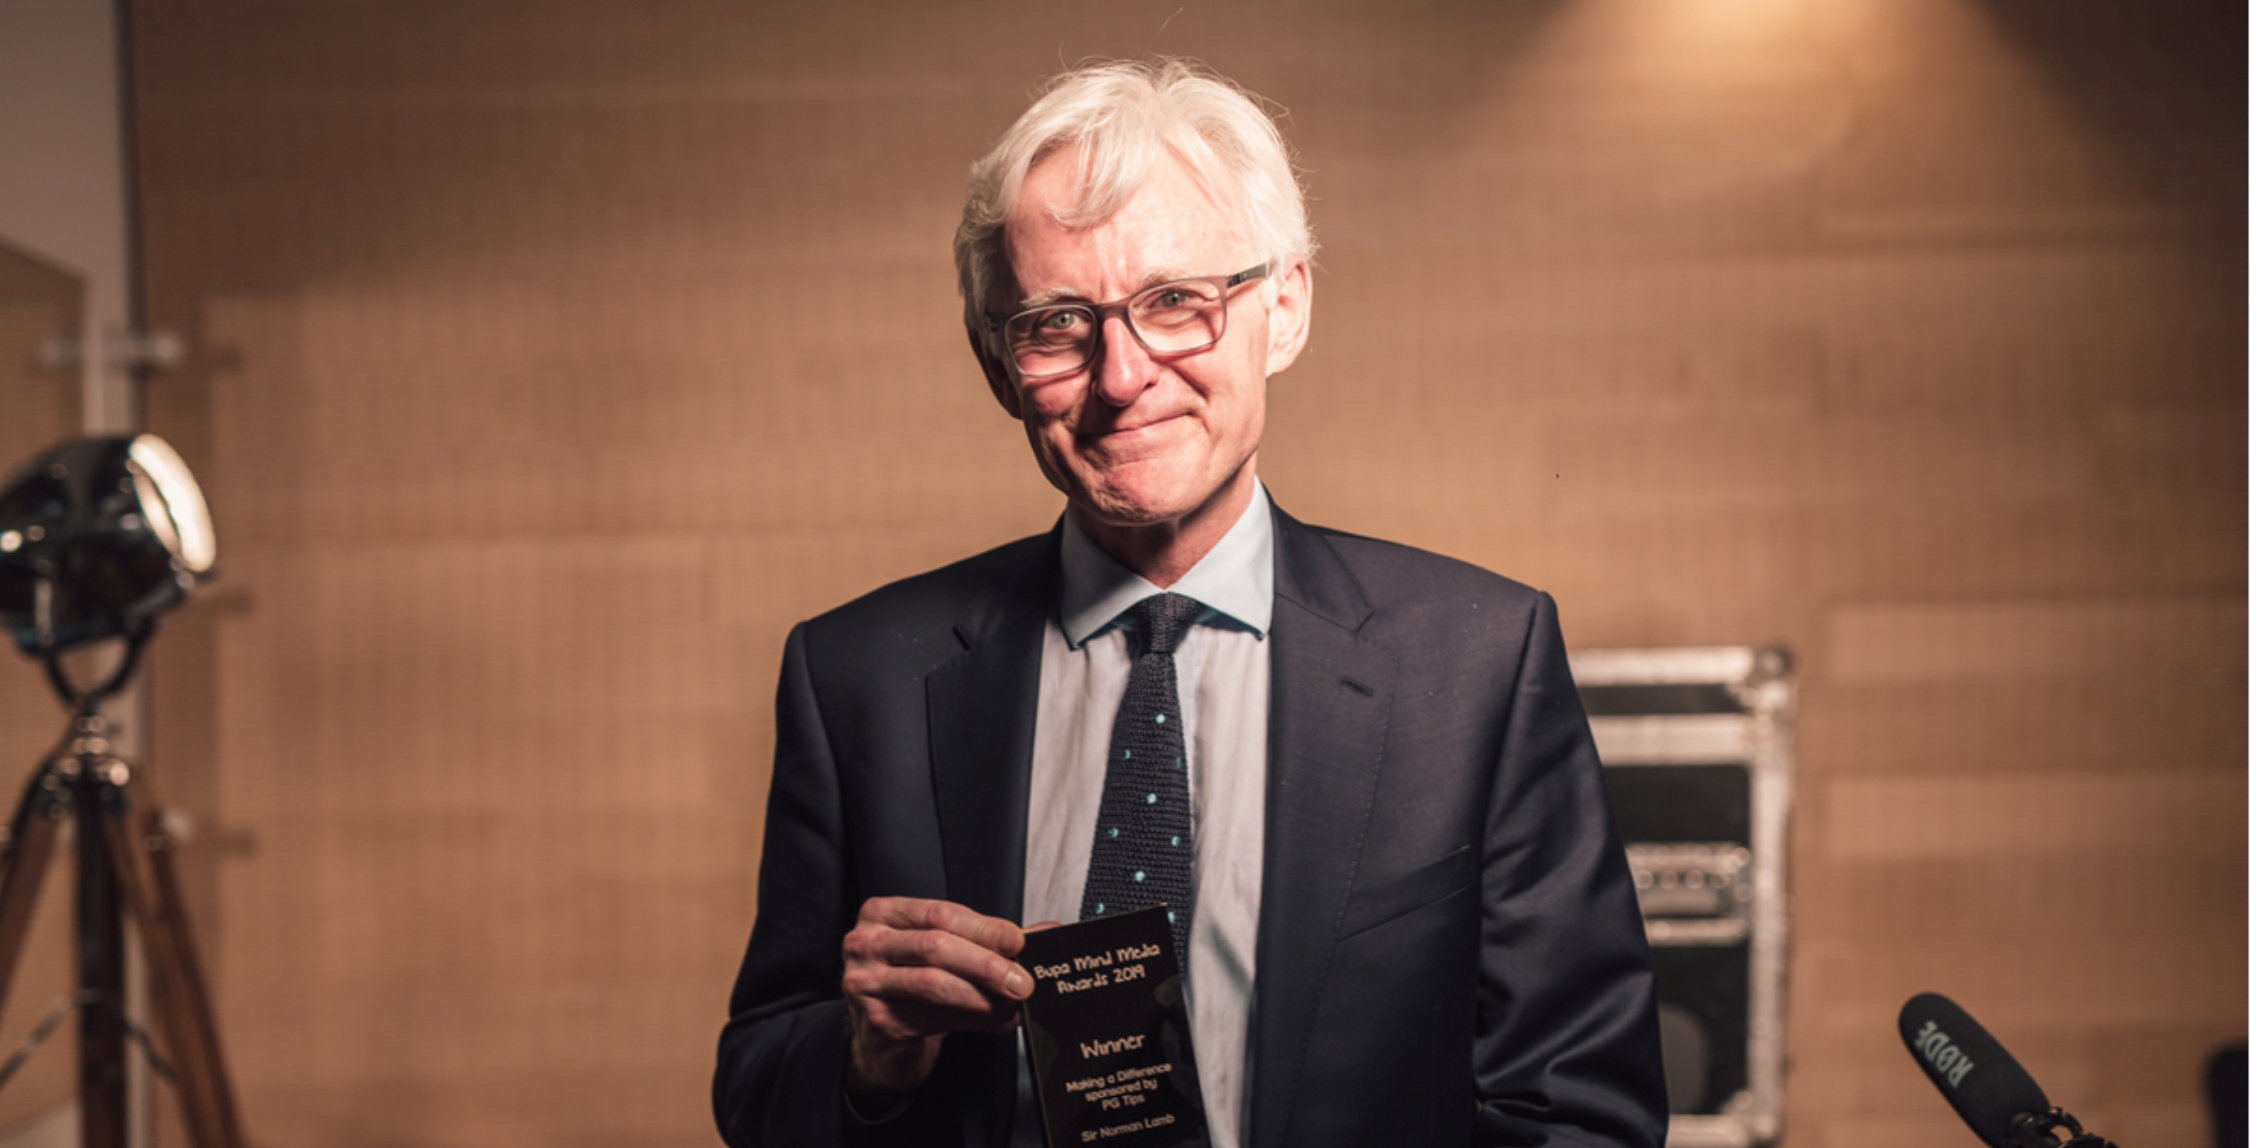 male wearing a suit, holding an award for Bupa Mind Media Awards 2019